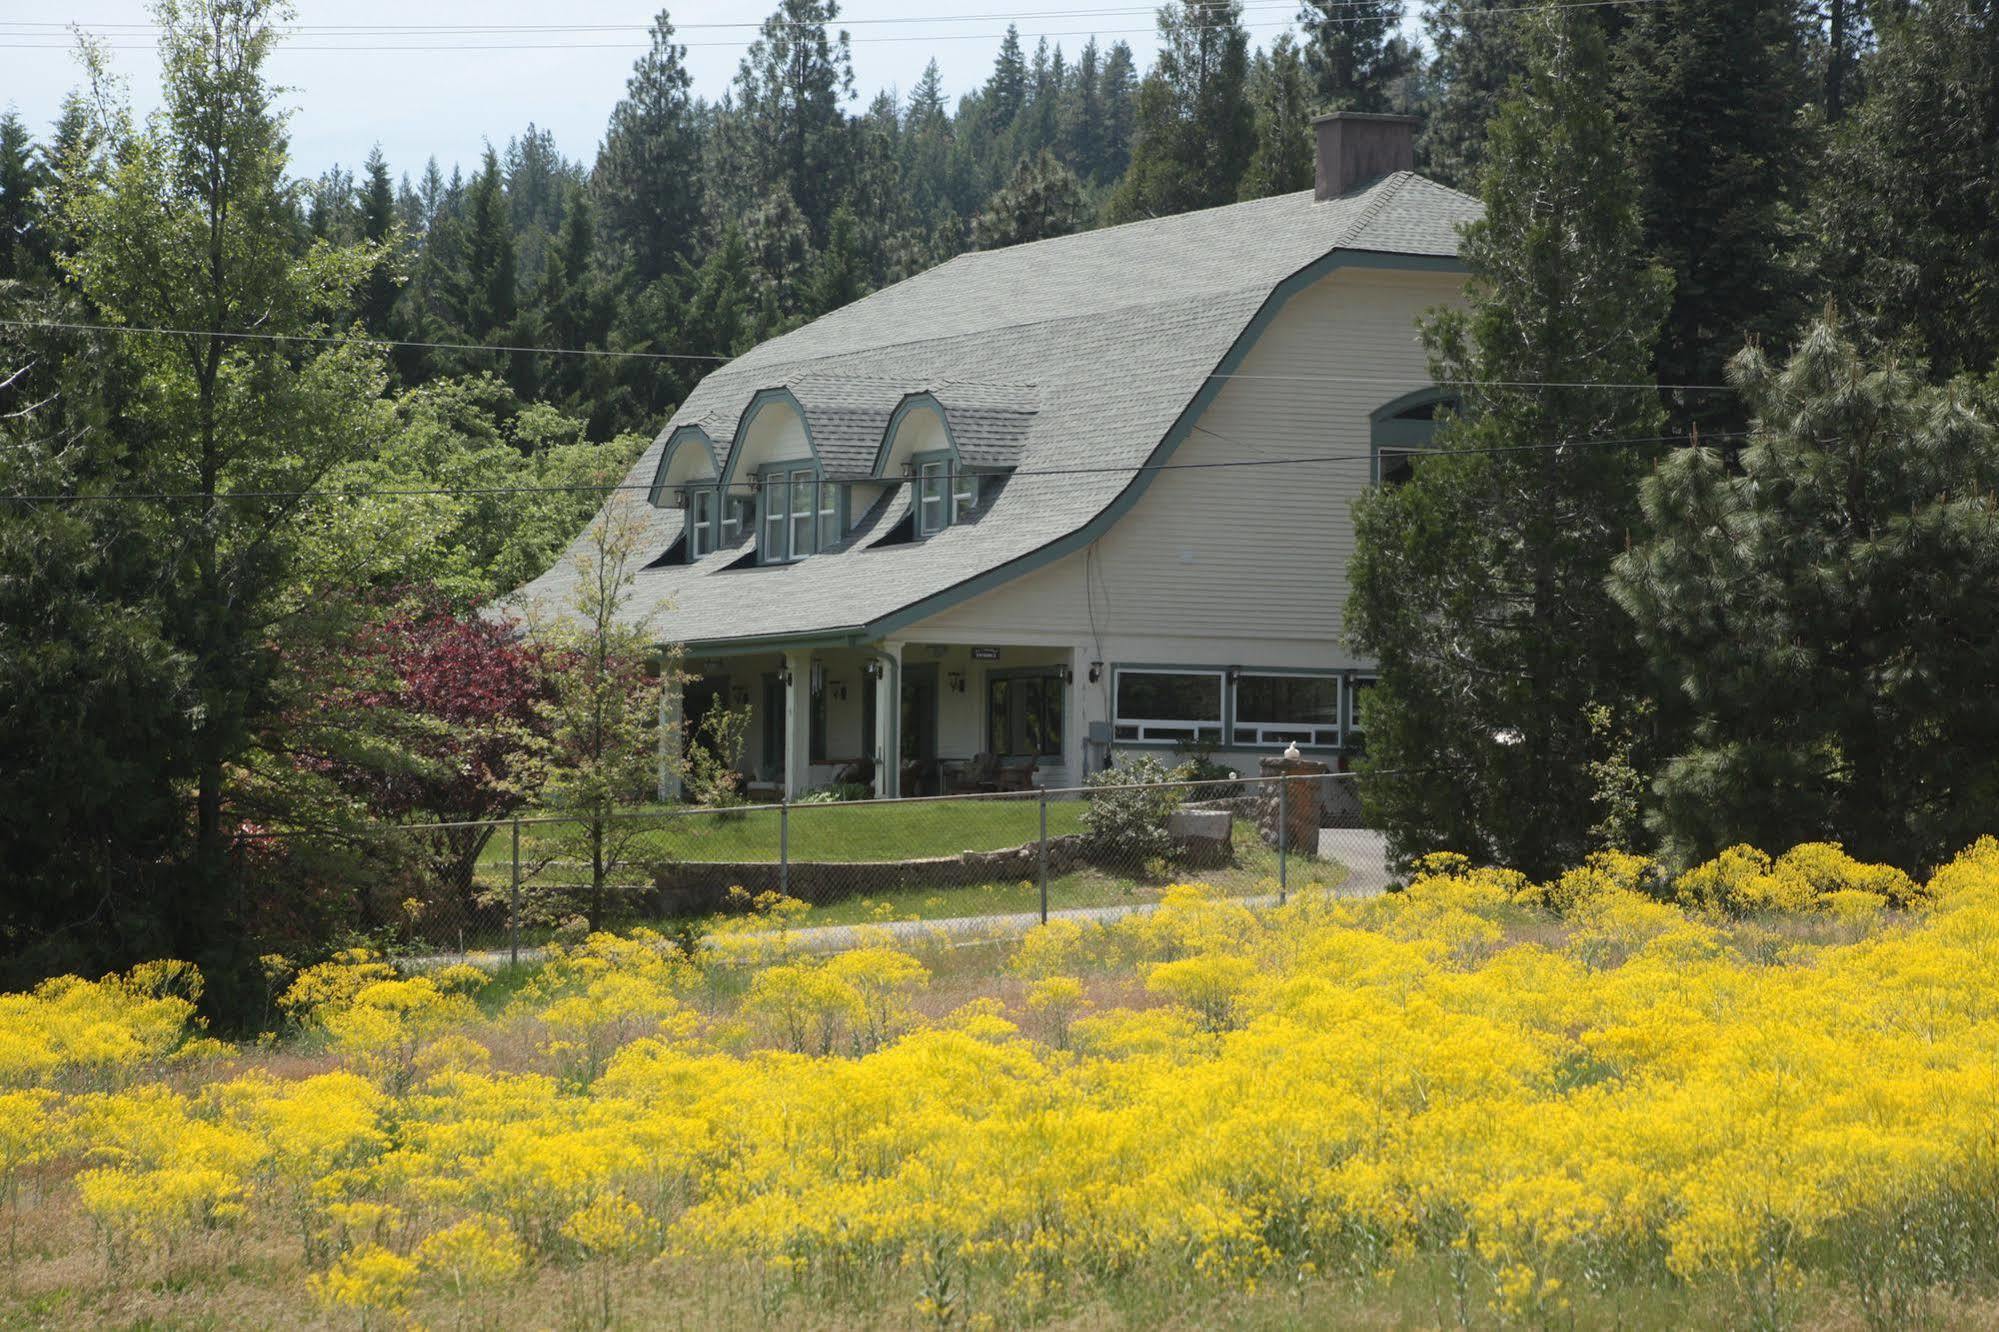 Mount Shasta Ranch Bed And Breakfast Exterior foto